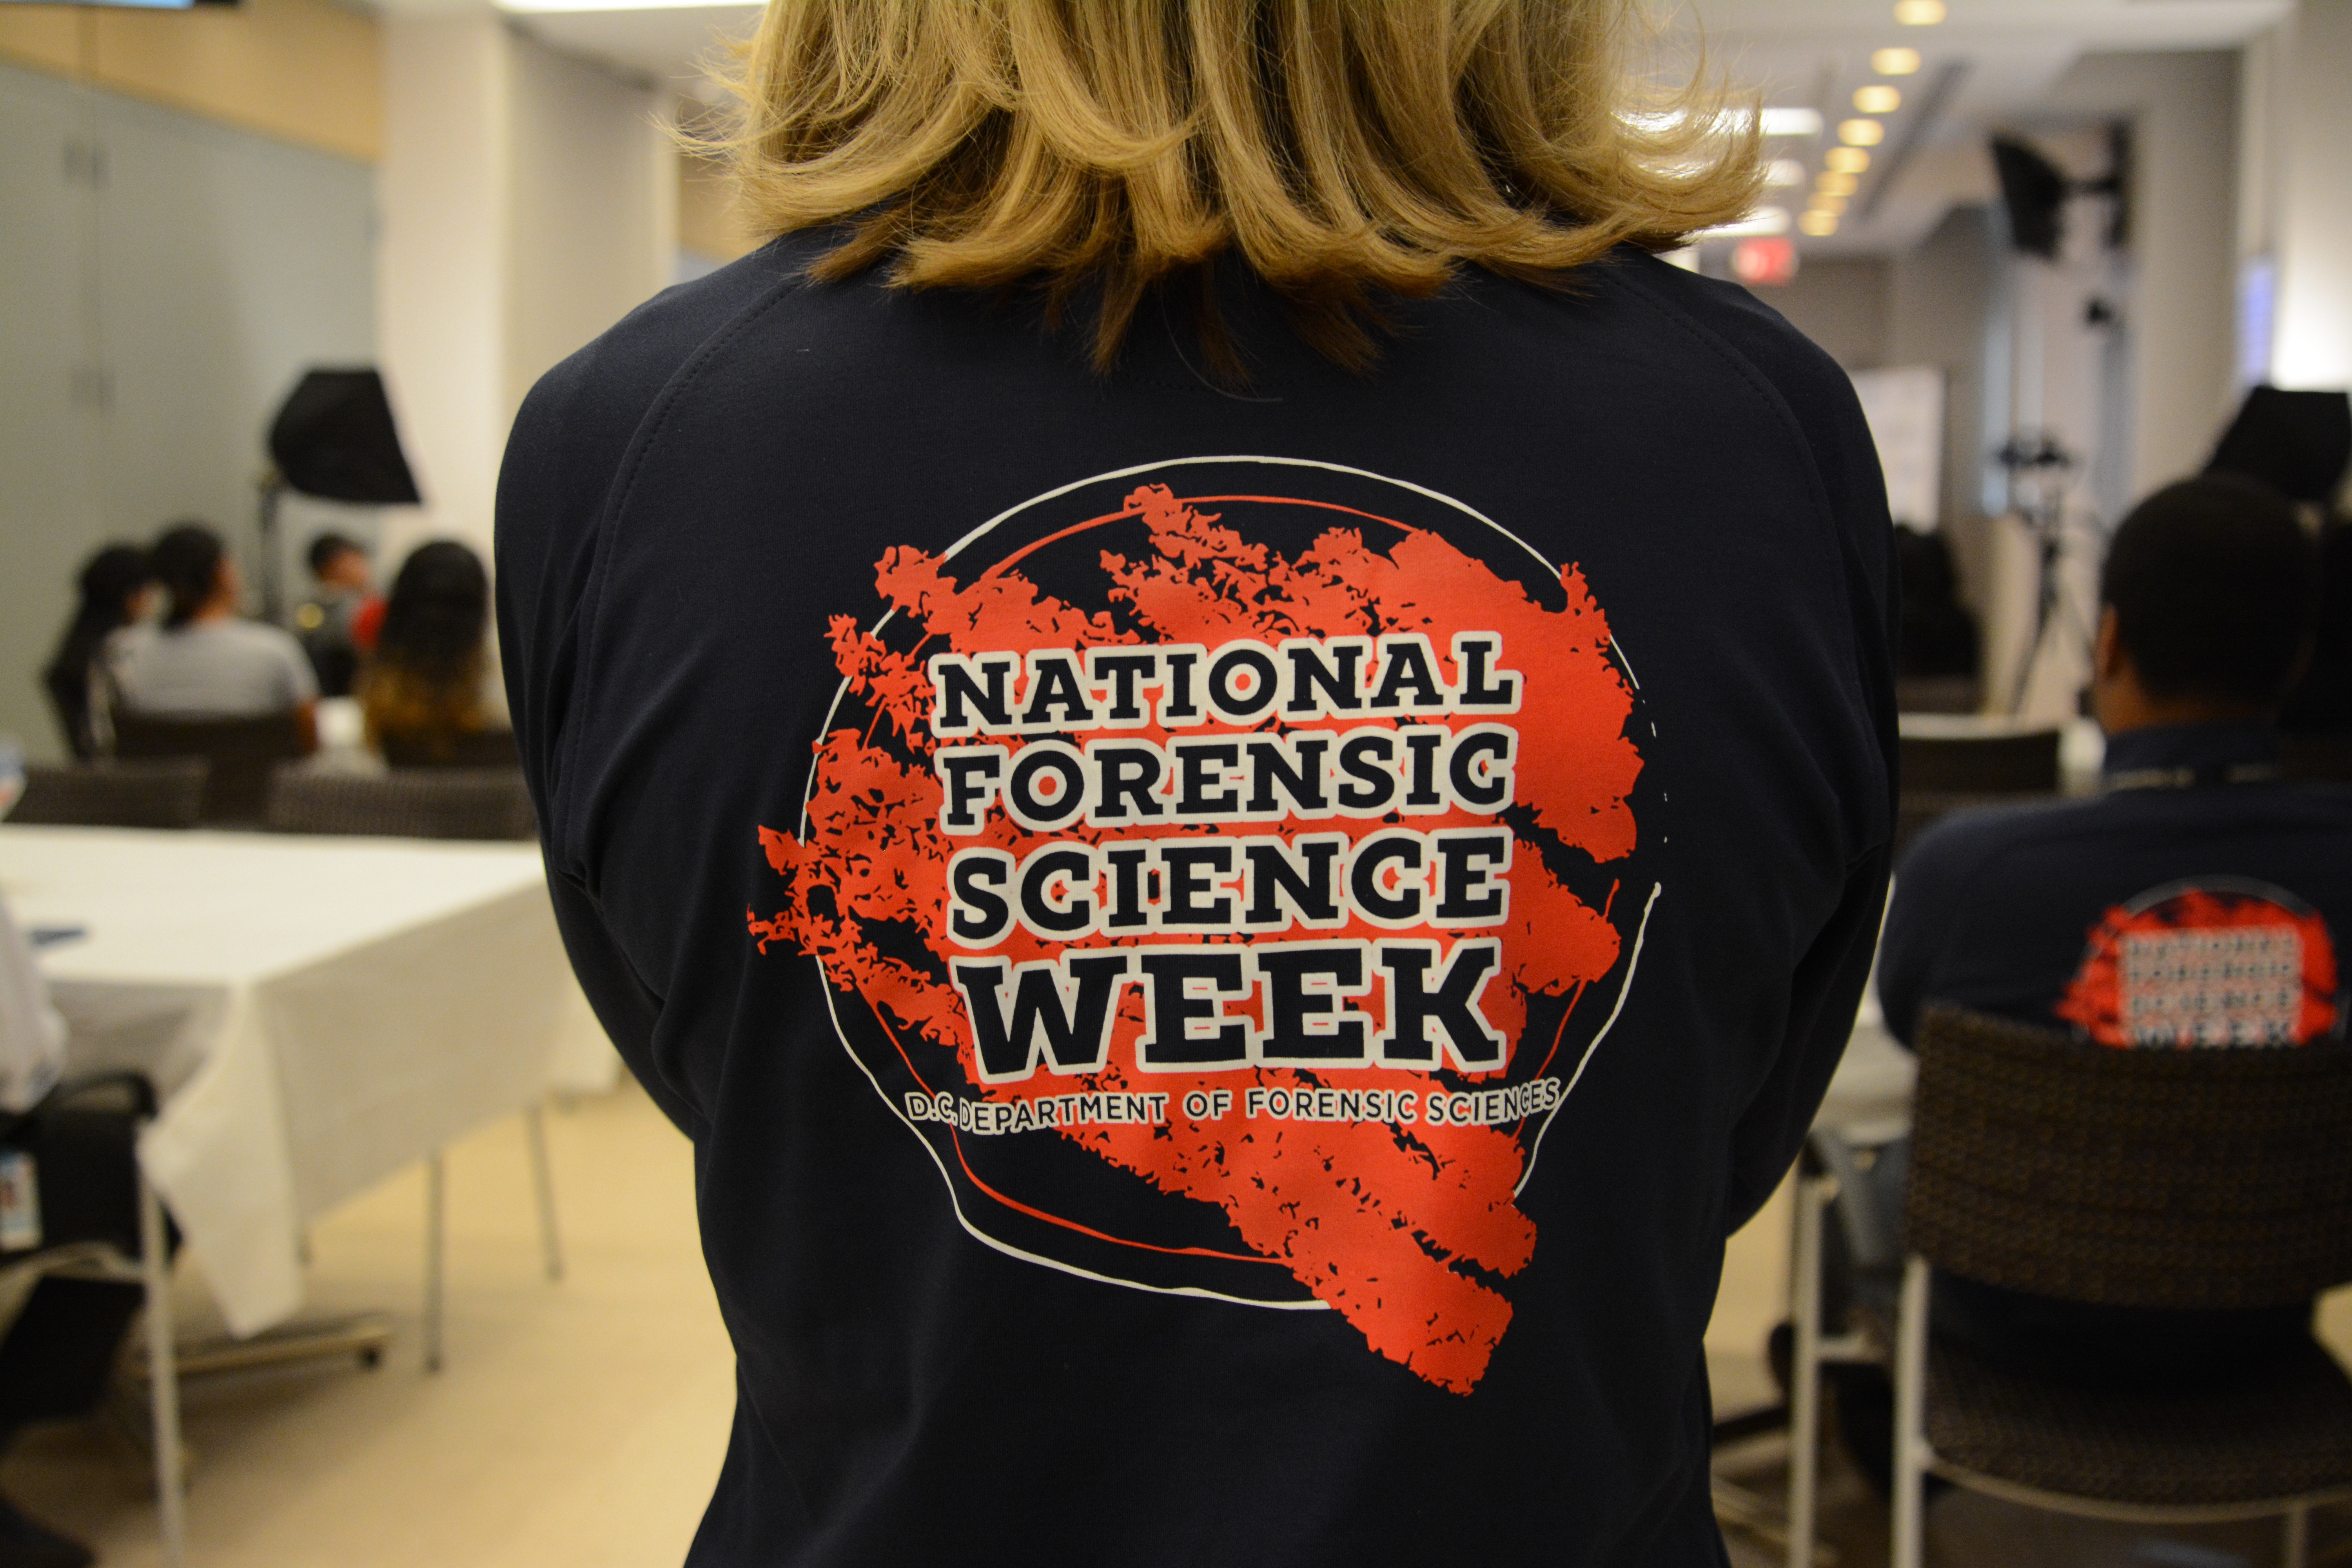 DC Department of Forensic Sciences hosts 4th Annual National Forensic Science Week events